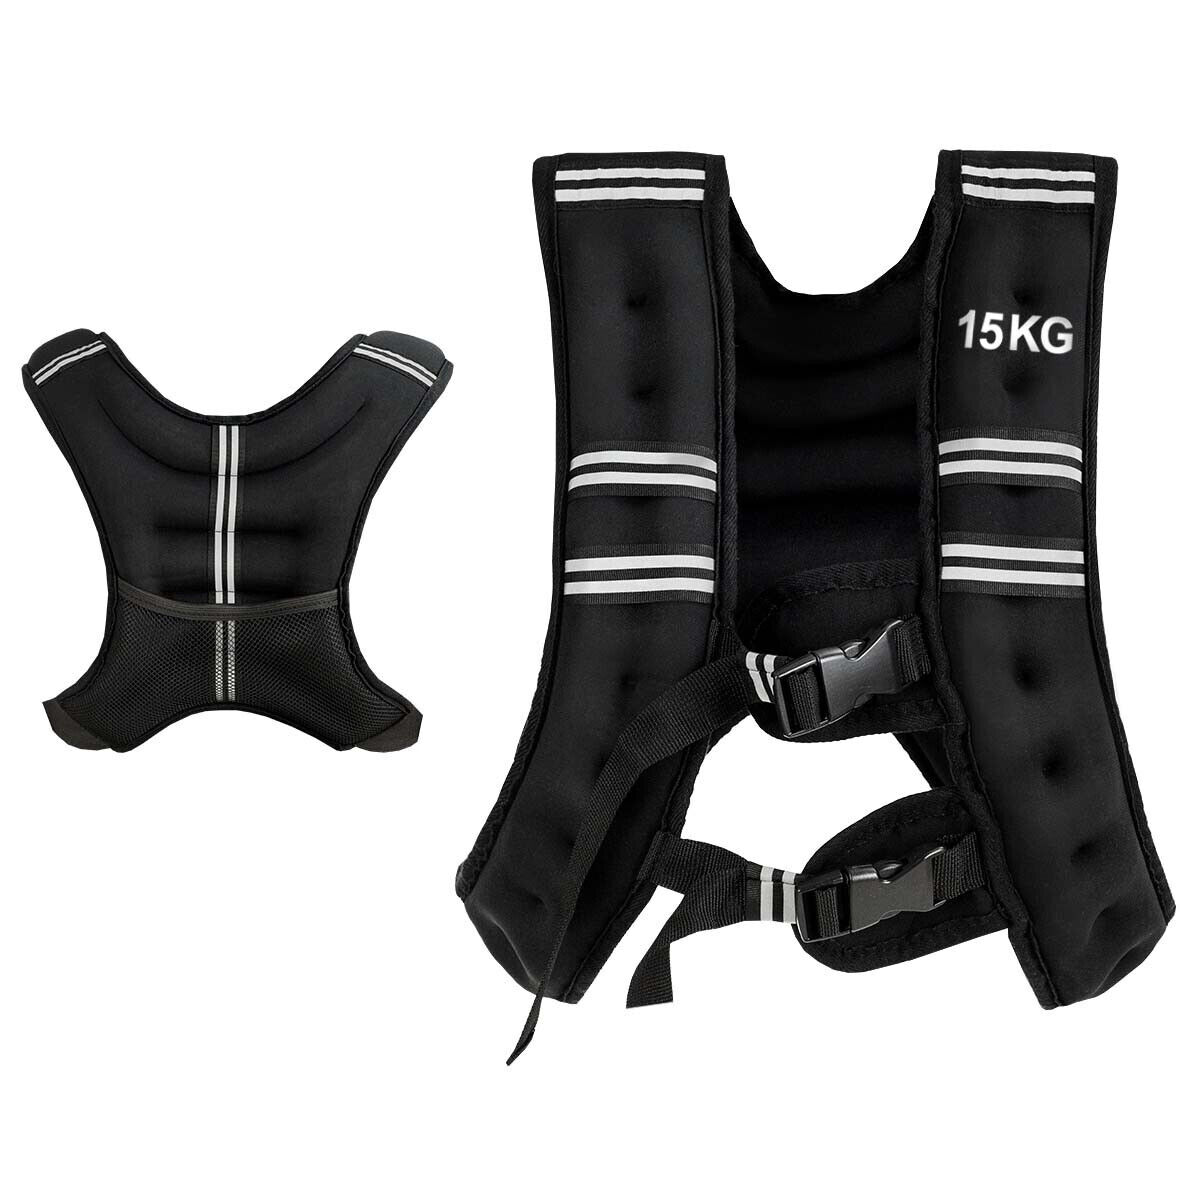 Weighted Vest with Adjustable Buckles and Mesh Bag-15kg